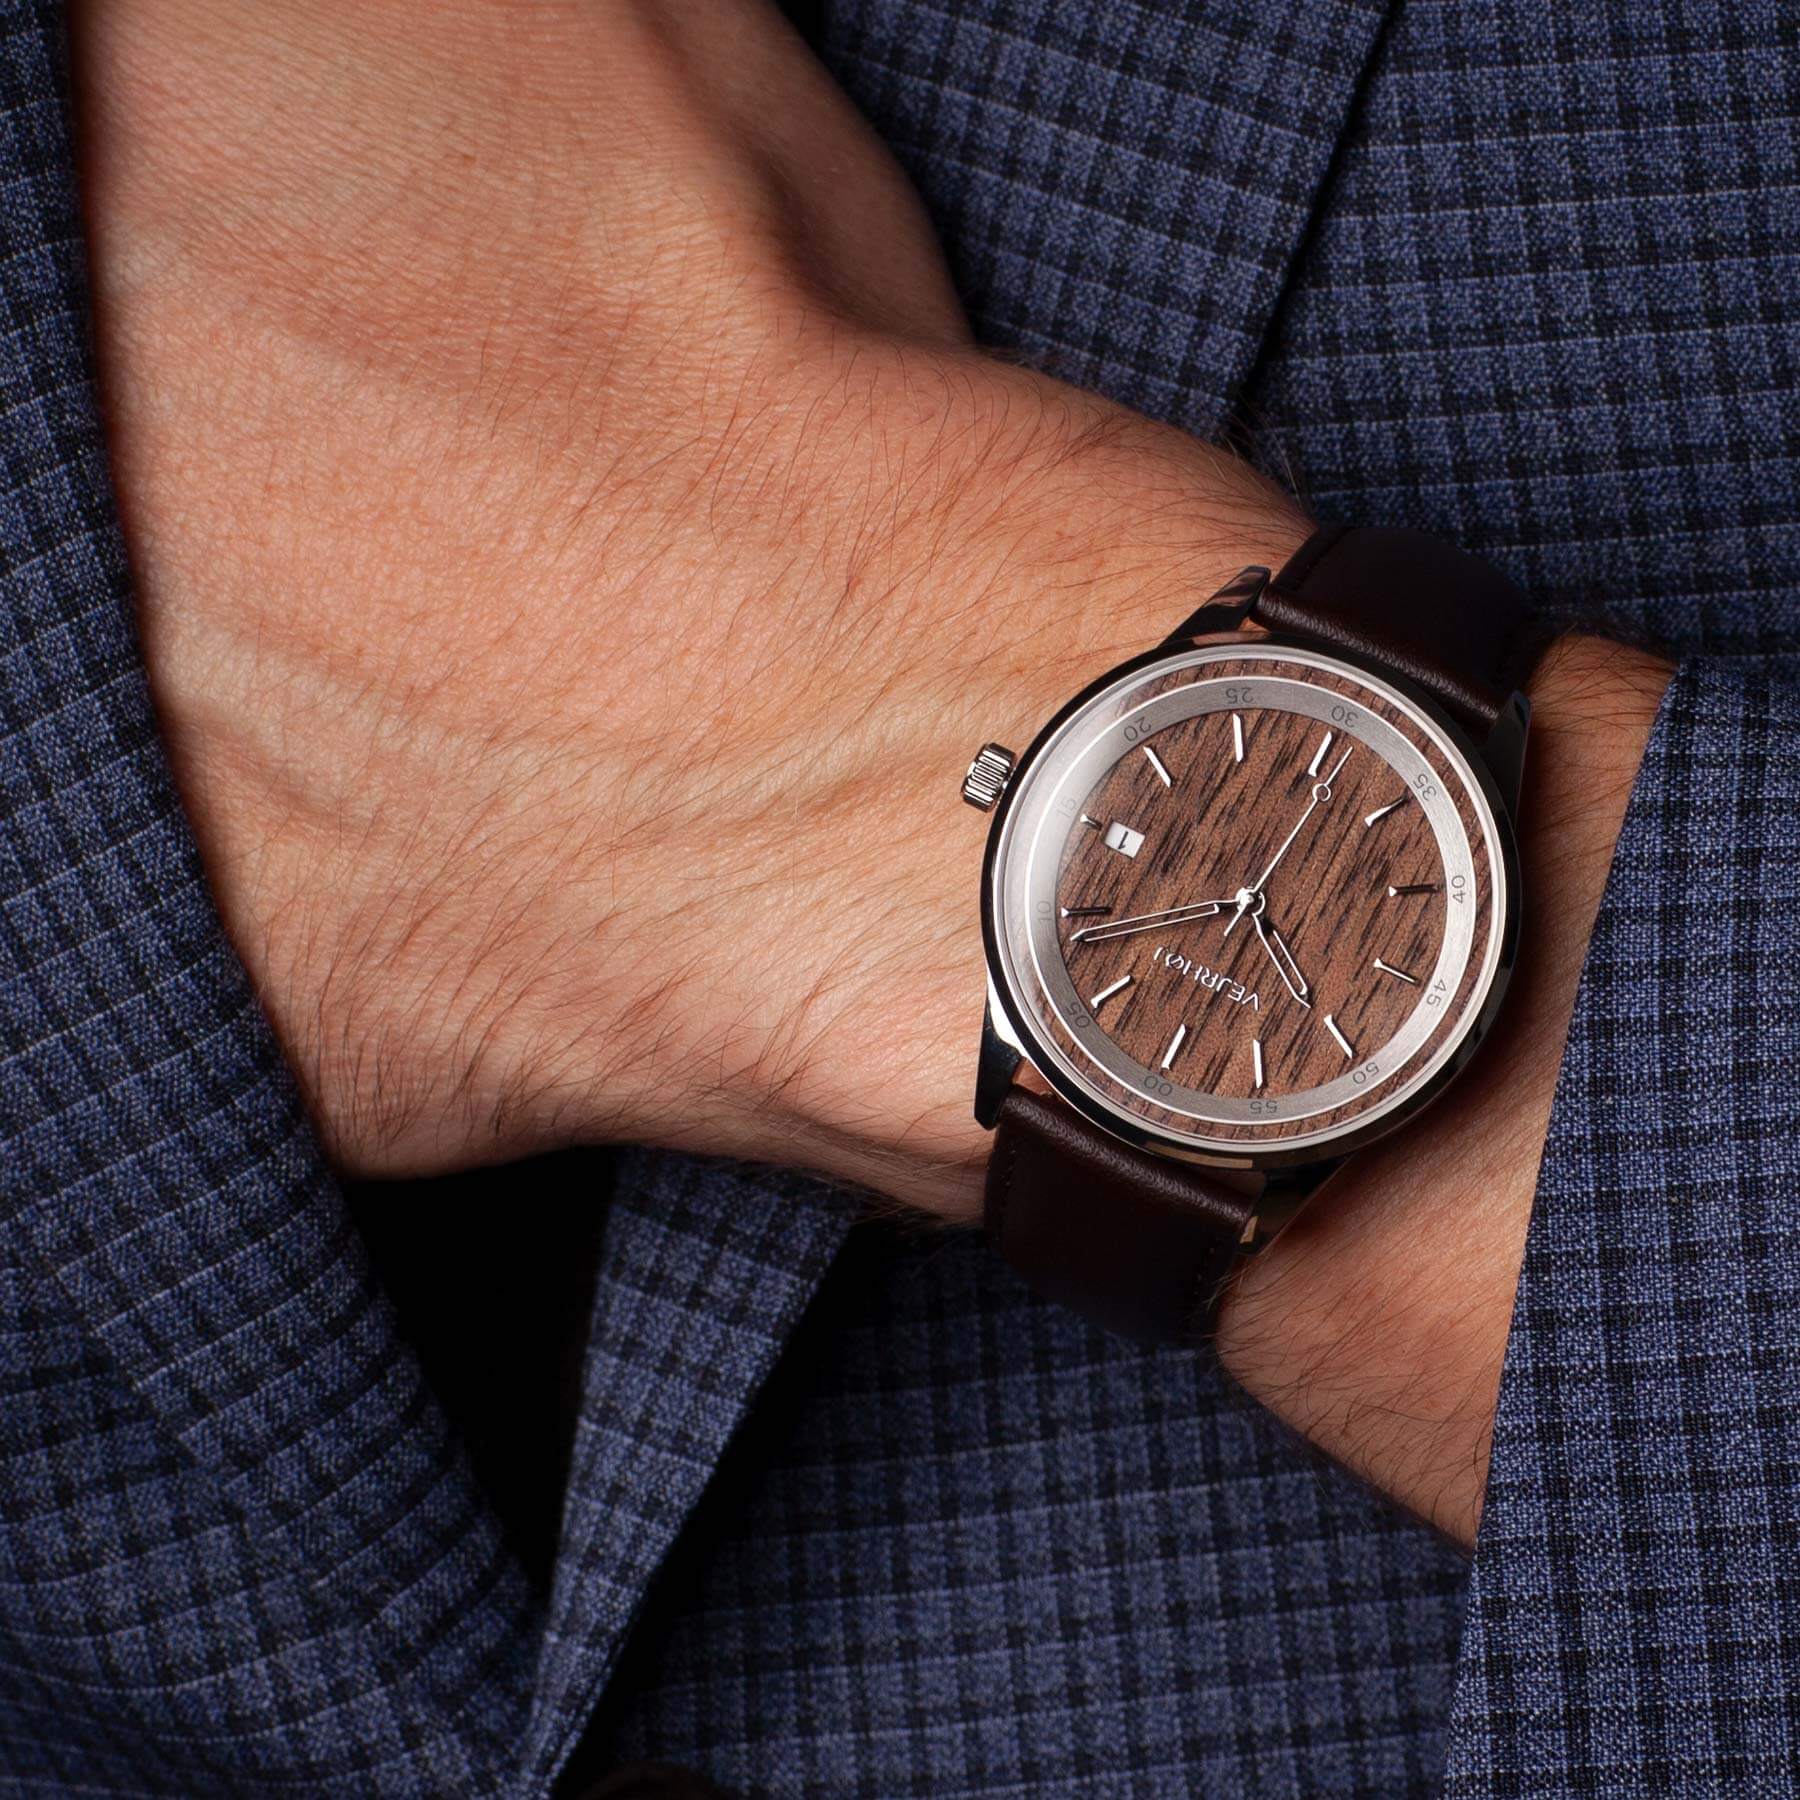 Automatic wrist watch with a dial made of natural walnut wood with brown straps paired with a suit